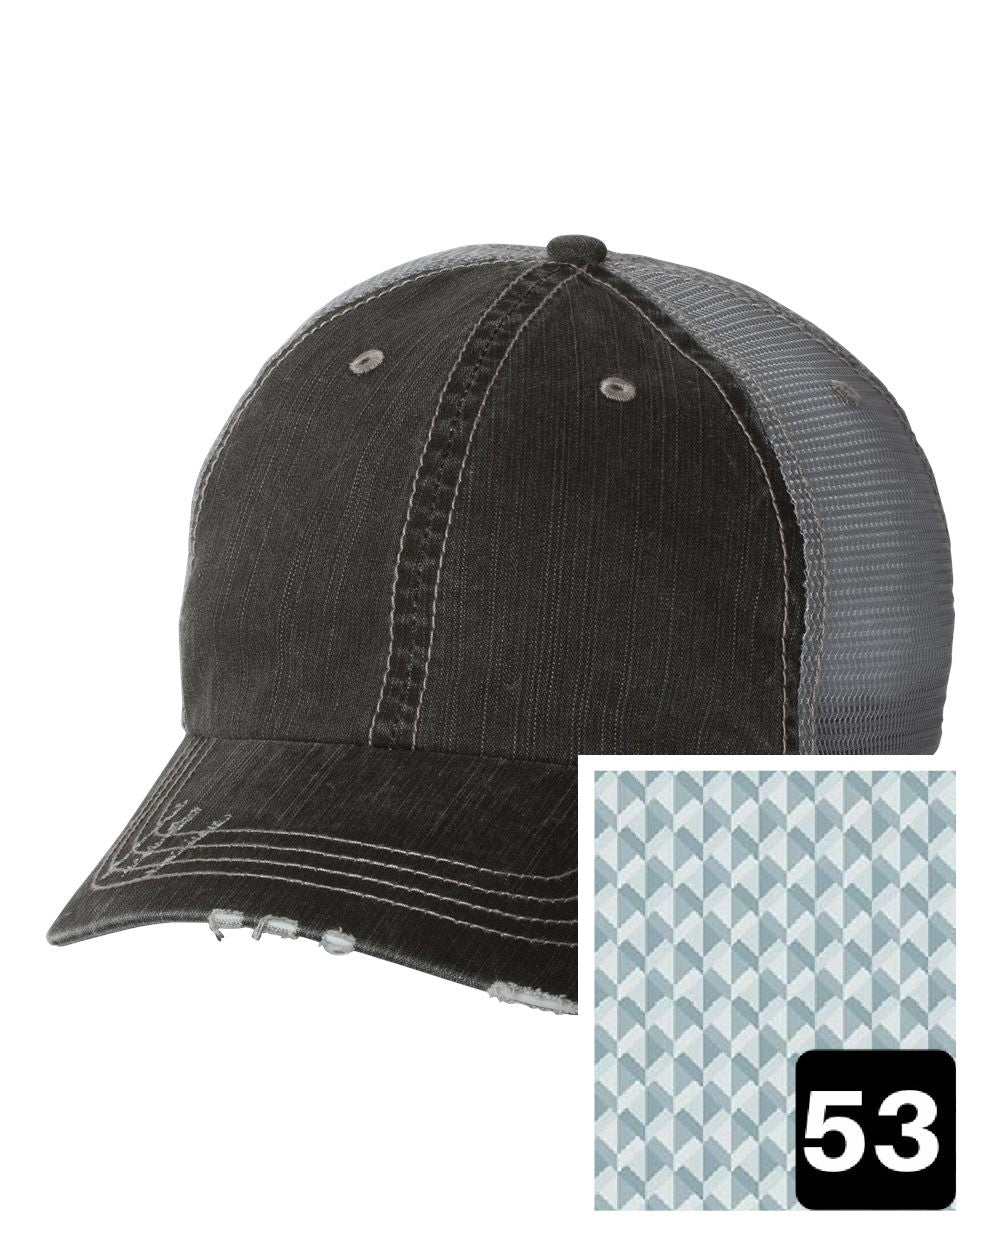 gray distressed trucker hat with multi-color stripe fabric state of Arizona